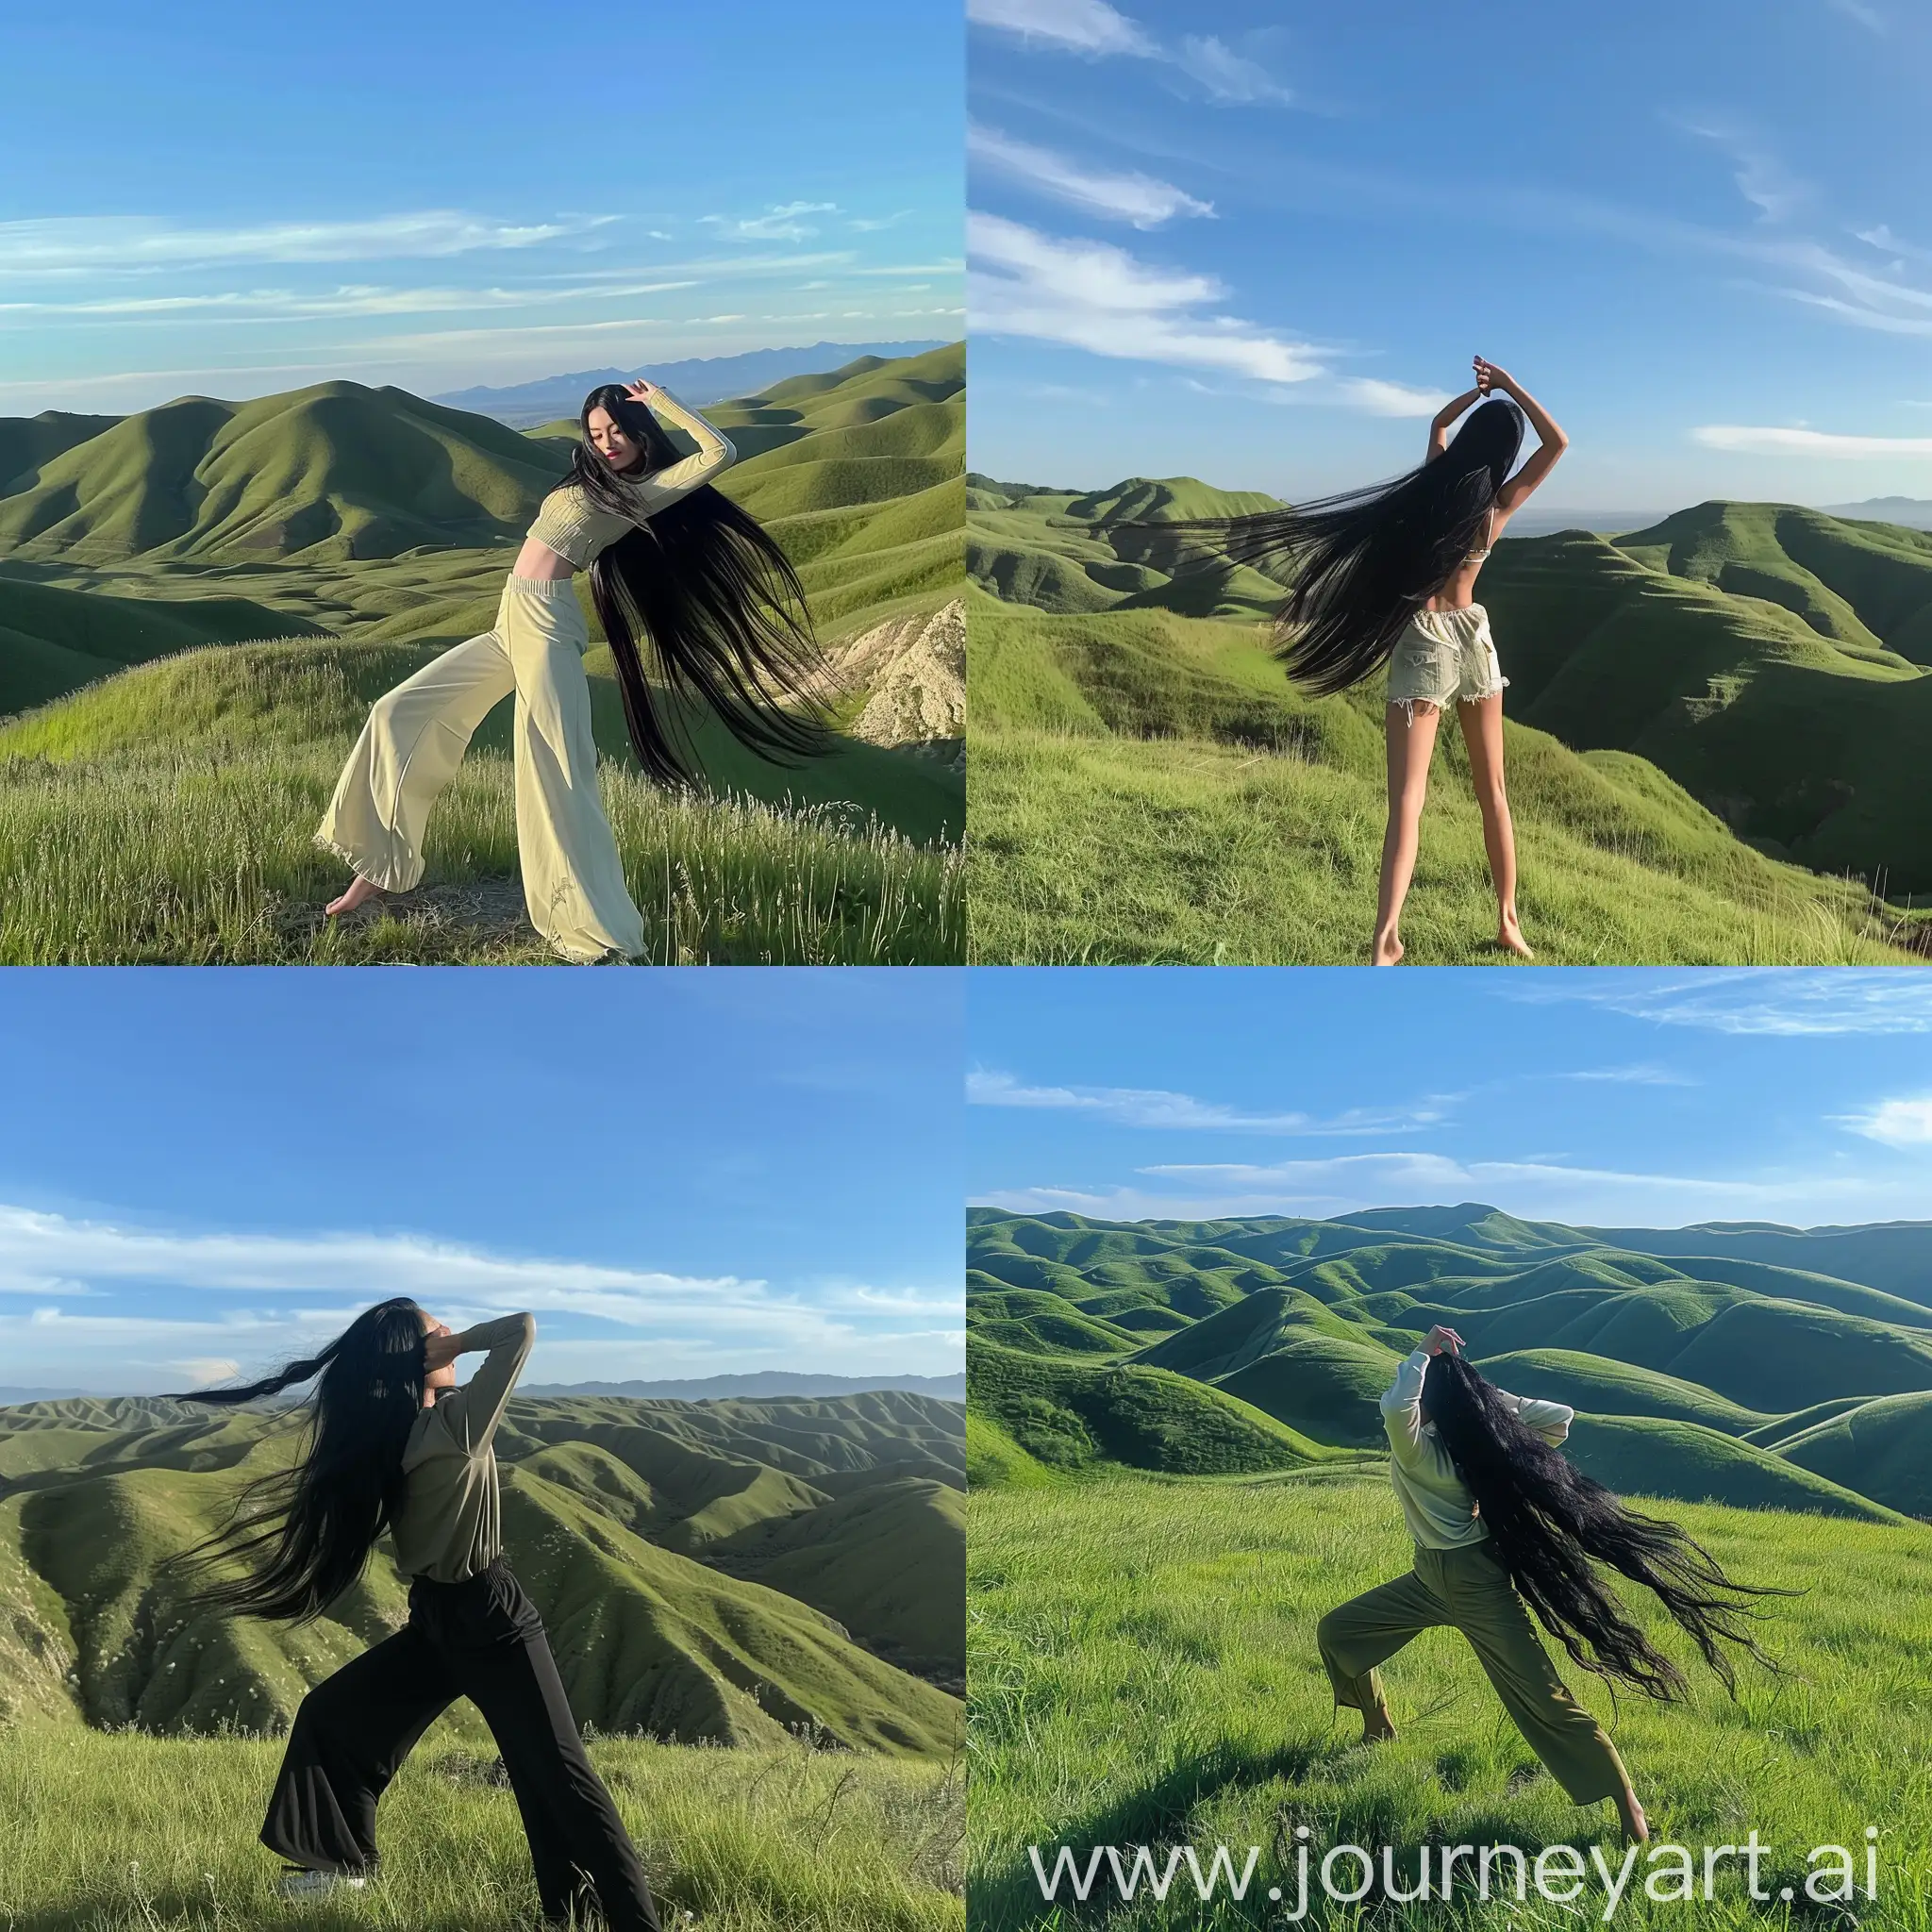 Aesthetic instagram picture real person, girl with long black hair doing a dabbing pose on a grassy hill with more hills and blue sky in the background 